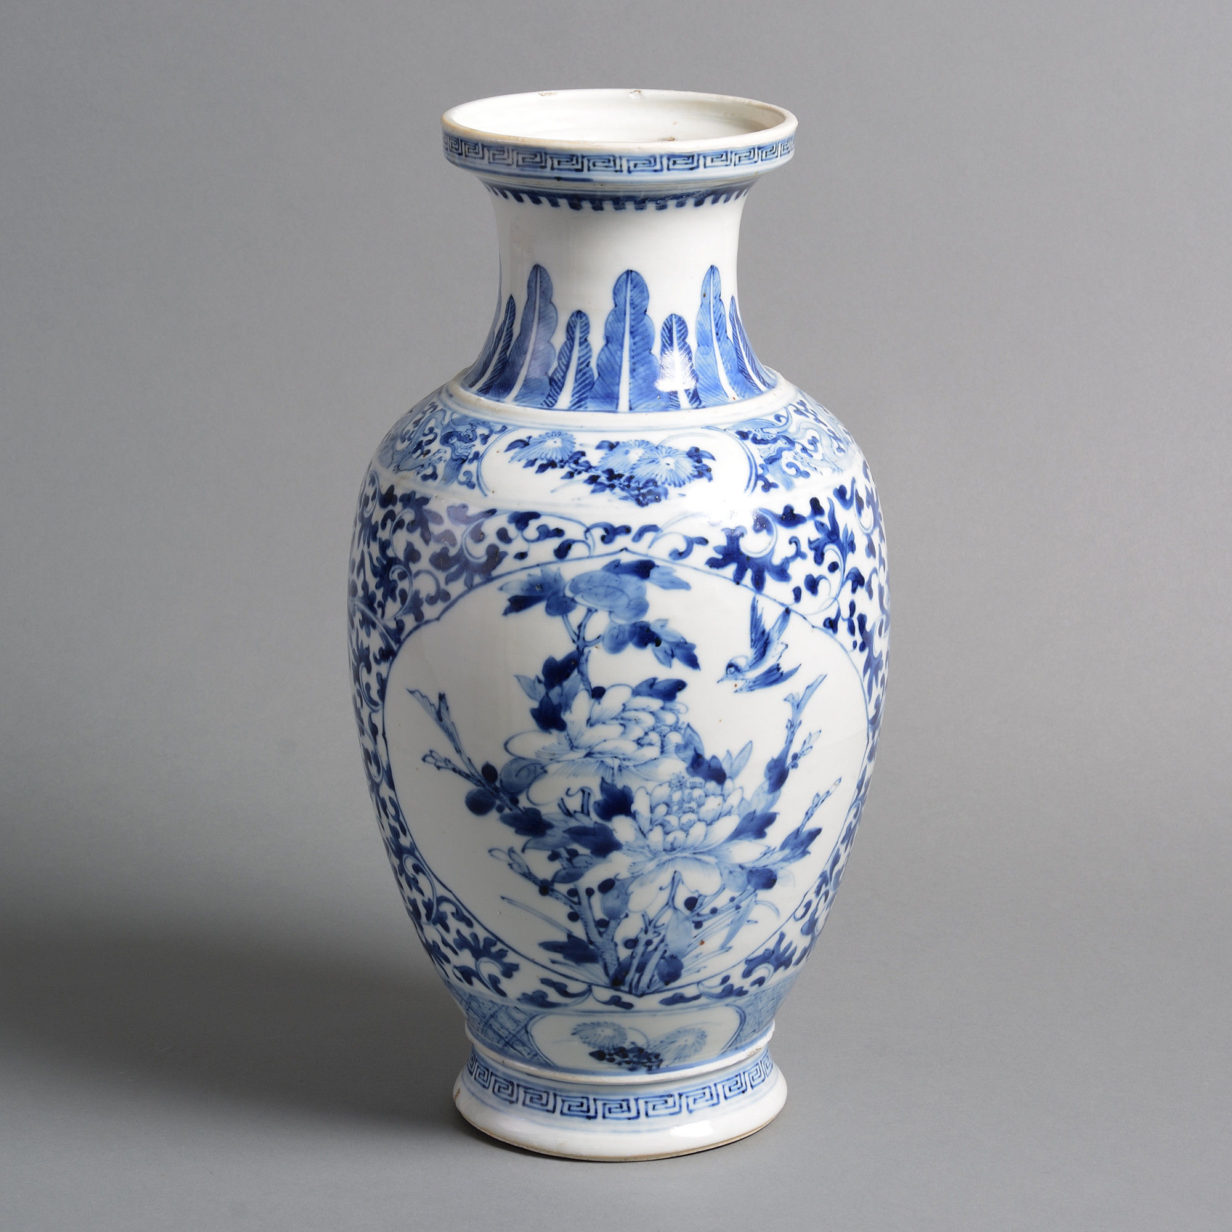 A 19th century qing dynasty blue and white porcelain vase